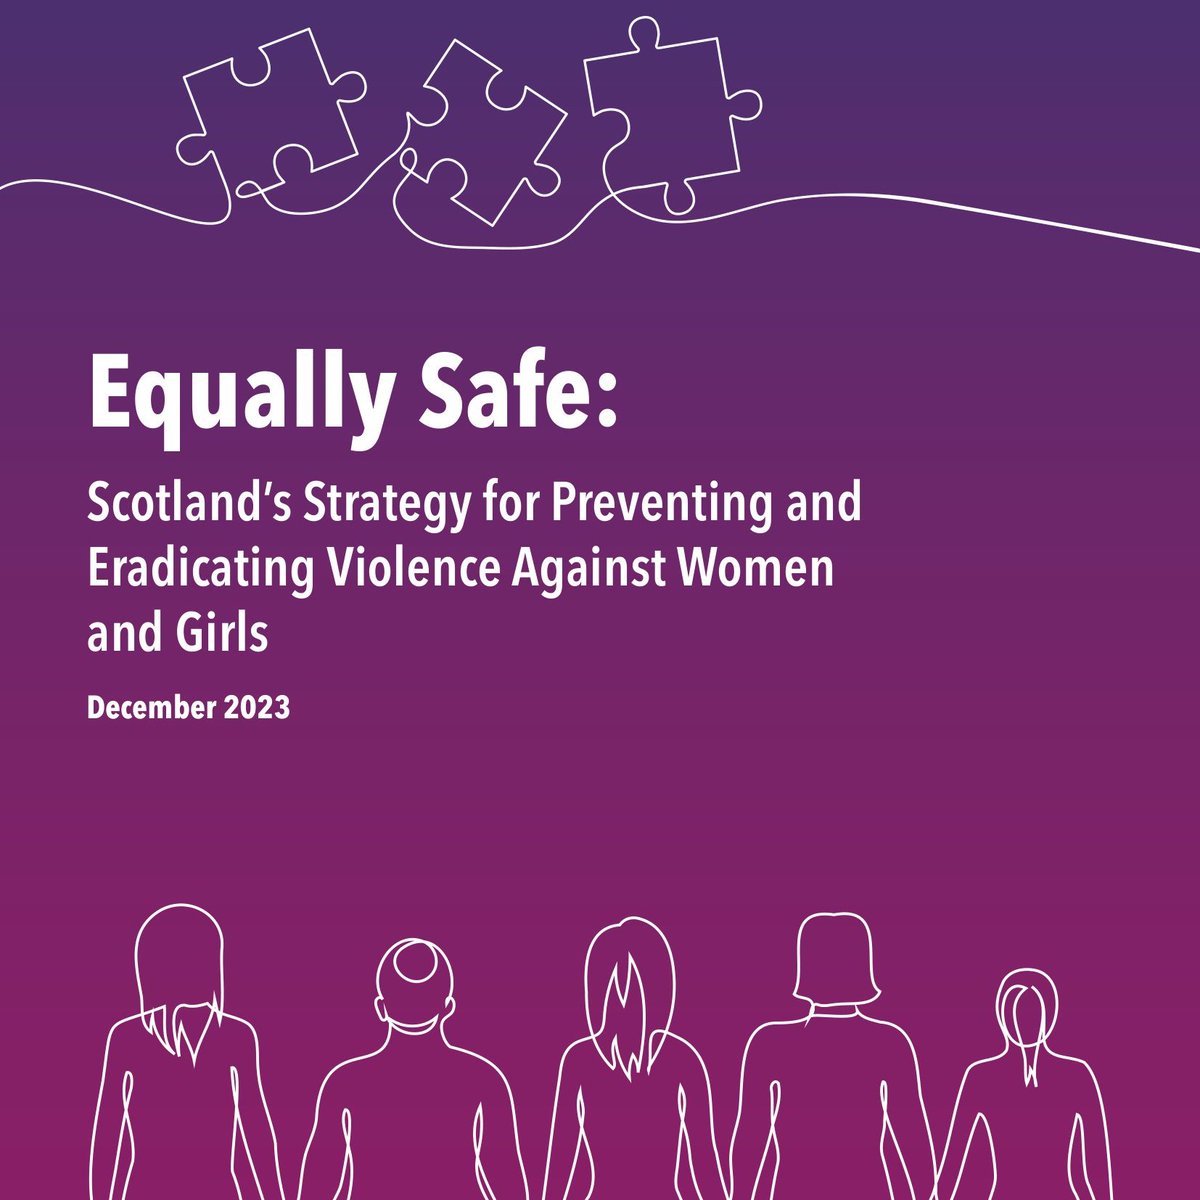 The refreshed Equally Safe Strategy was published today during #16DaysOfActivism, showing the continued commitment to preventing and eradicating this violence against women and girls and the underlying attitudes and systems that perpetuate it: gov.scot/publications/e…